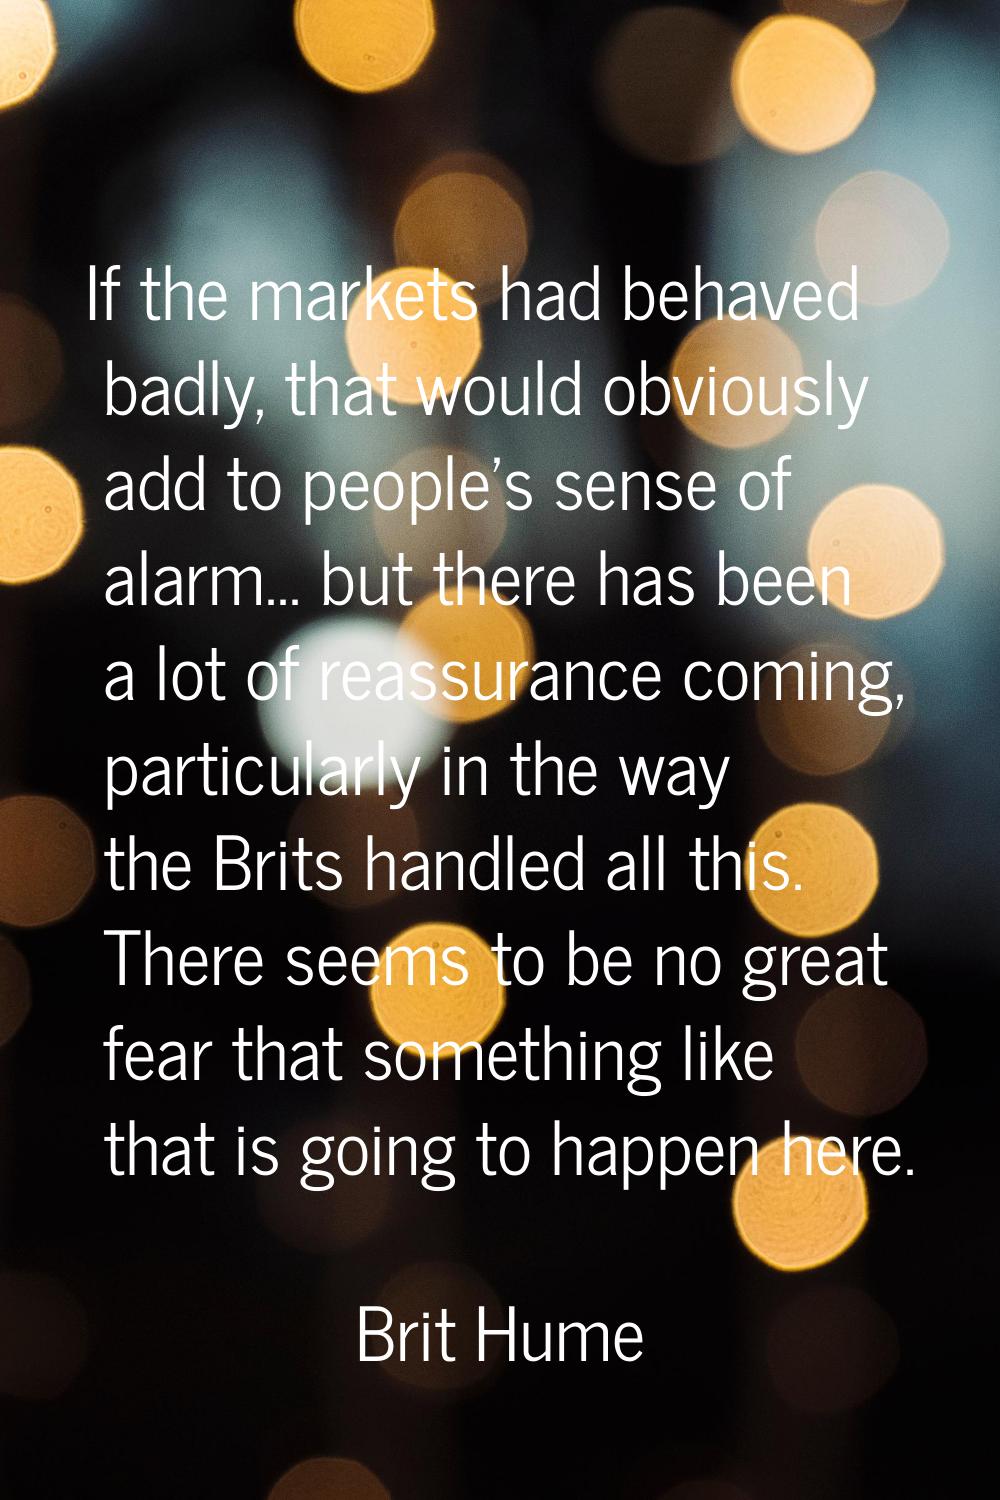 If the markets had behaved badly, that would obviously add to people's sense of alarm... but there 